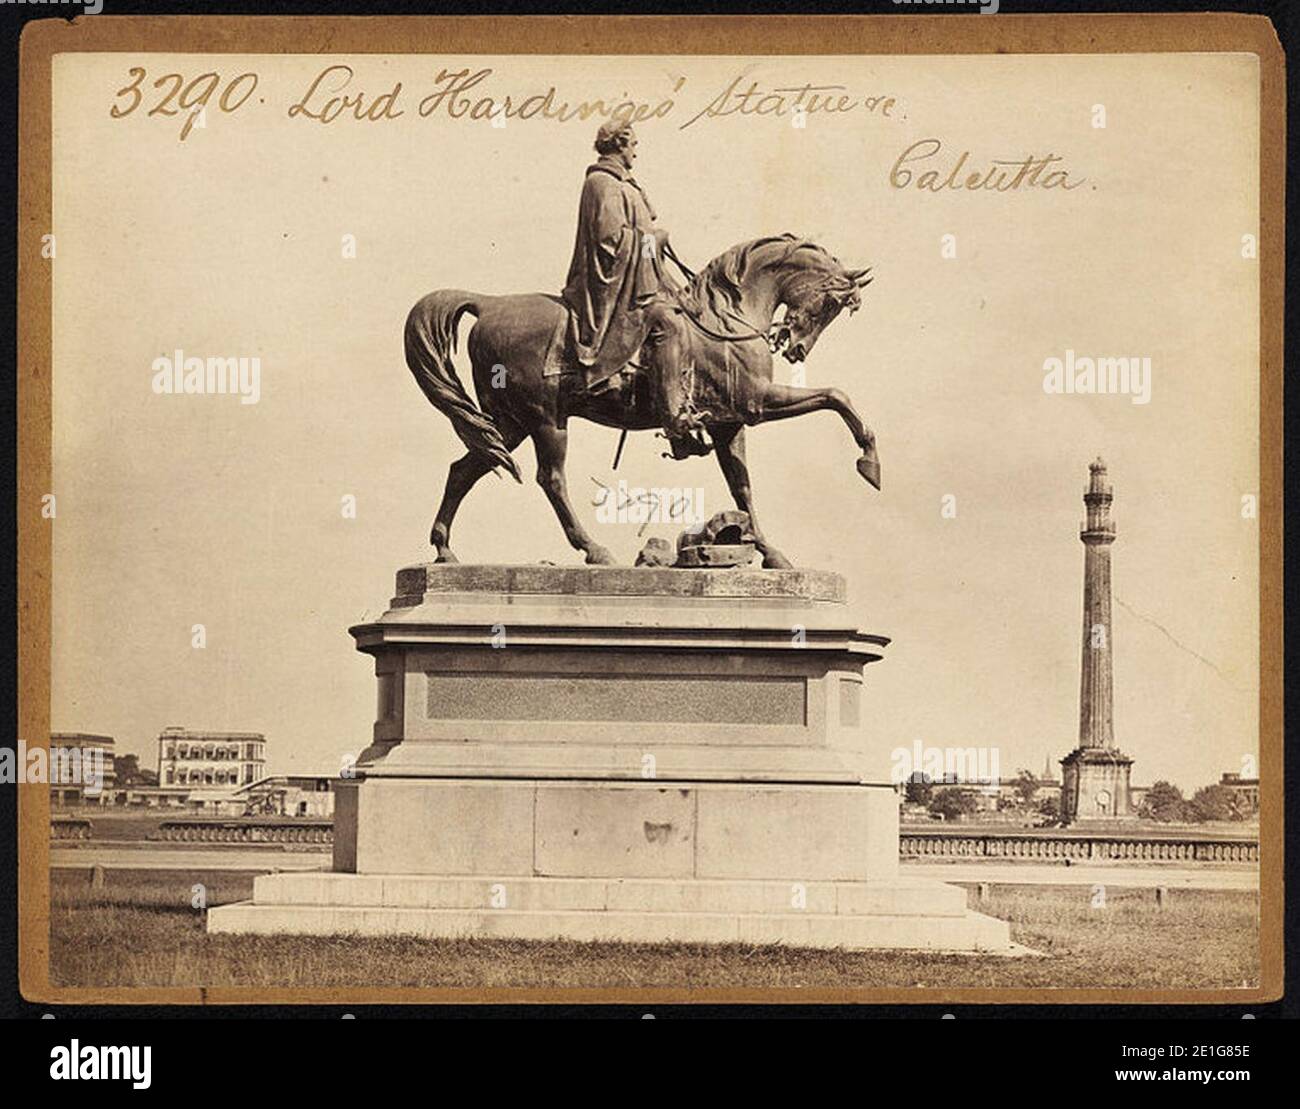 Lord Hardinge's Statue in Calcutta by Francis Frith 1. Stock Photo